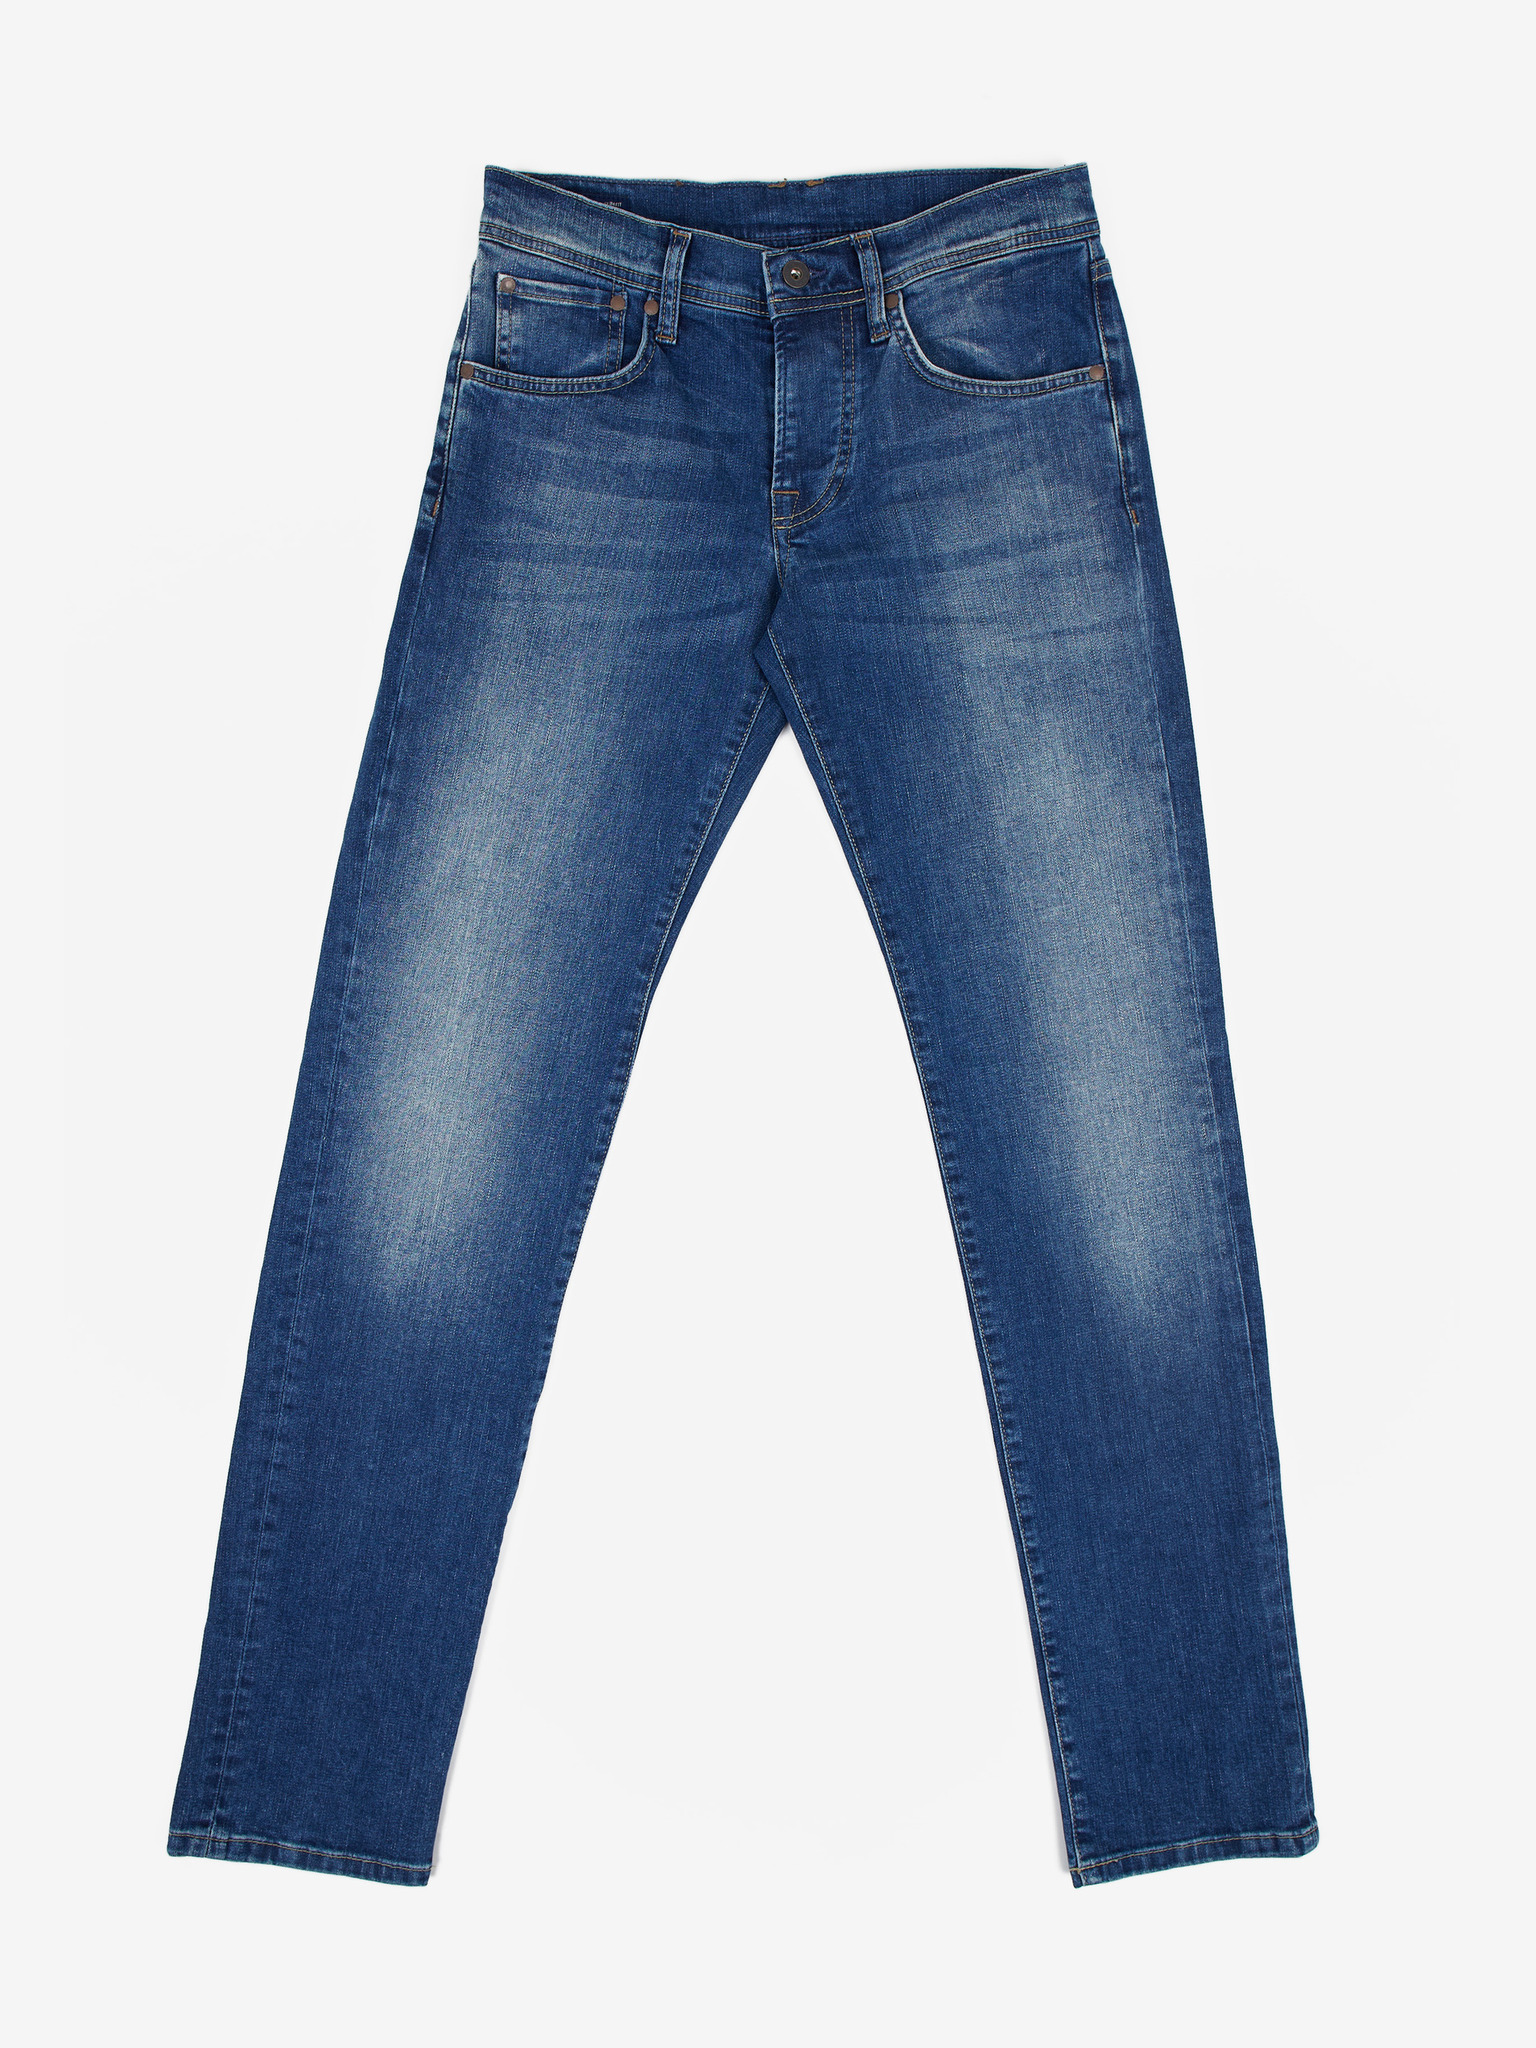 Cane Jeans - Pepe Jeans